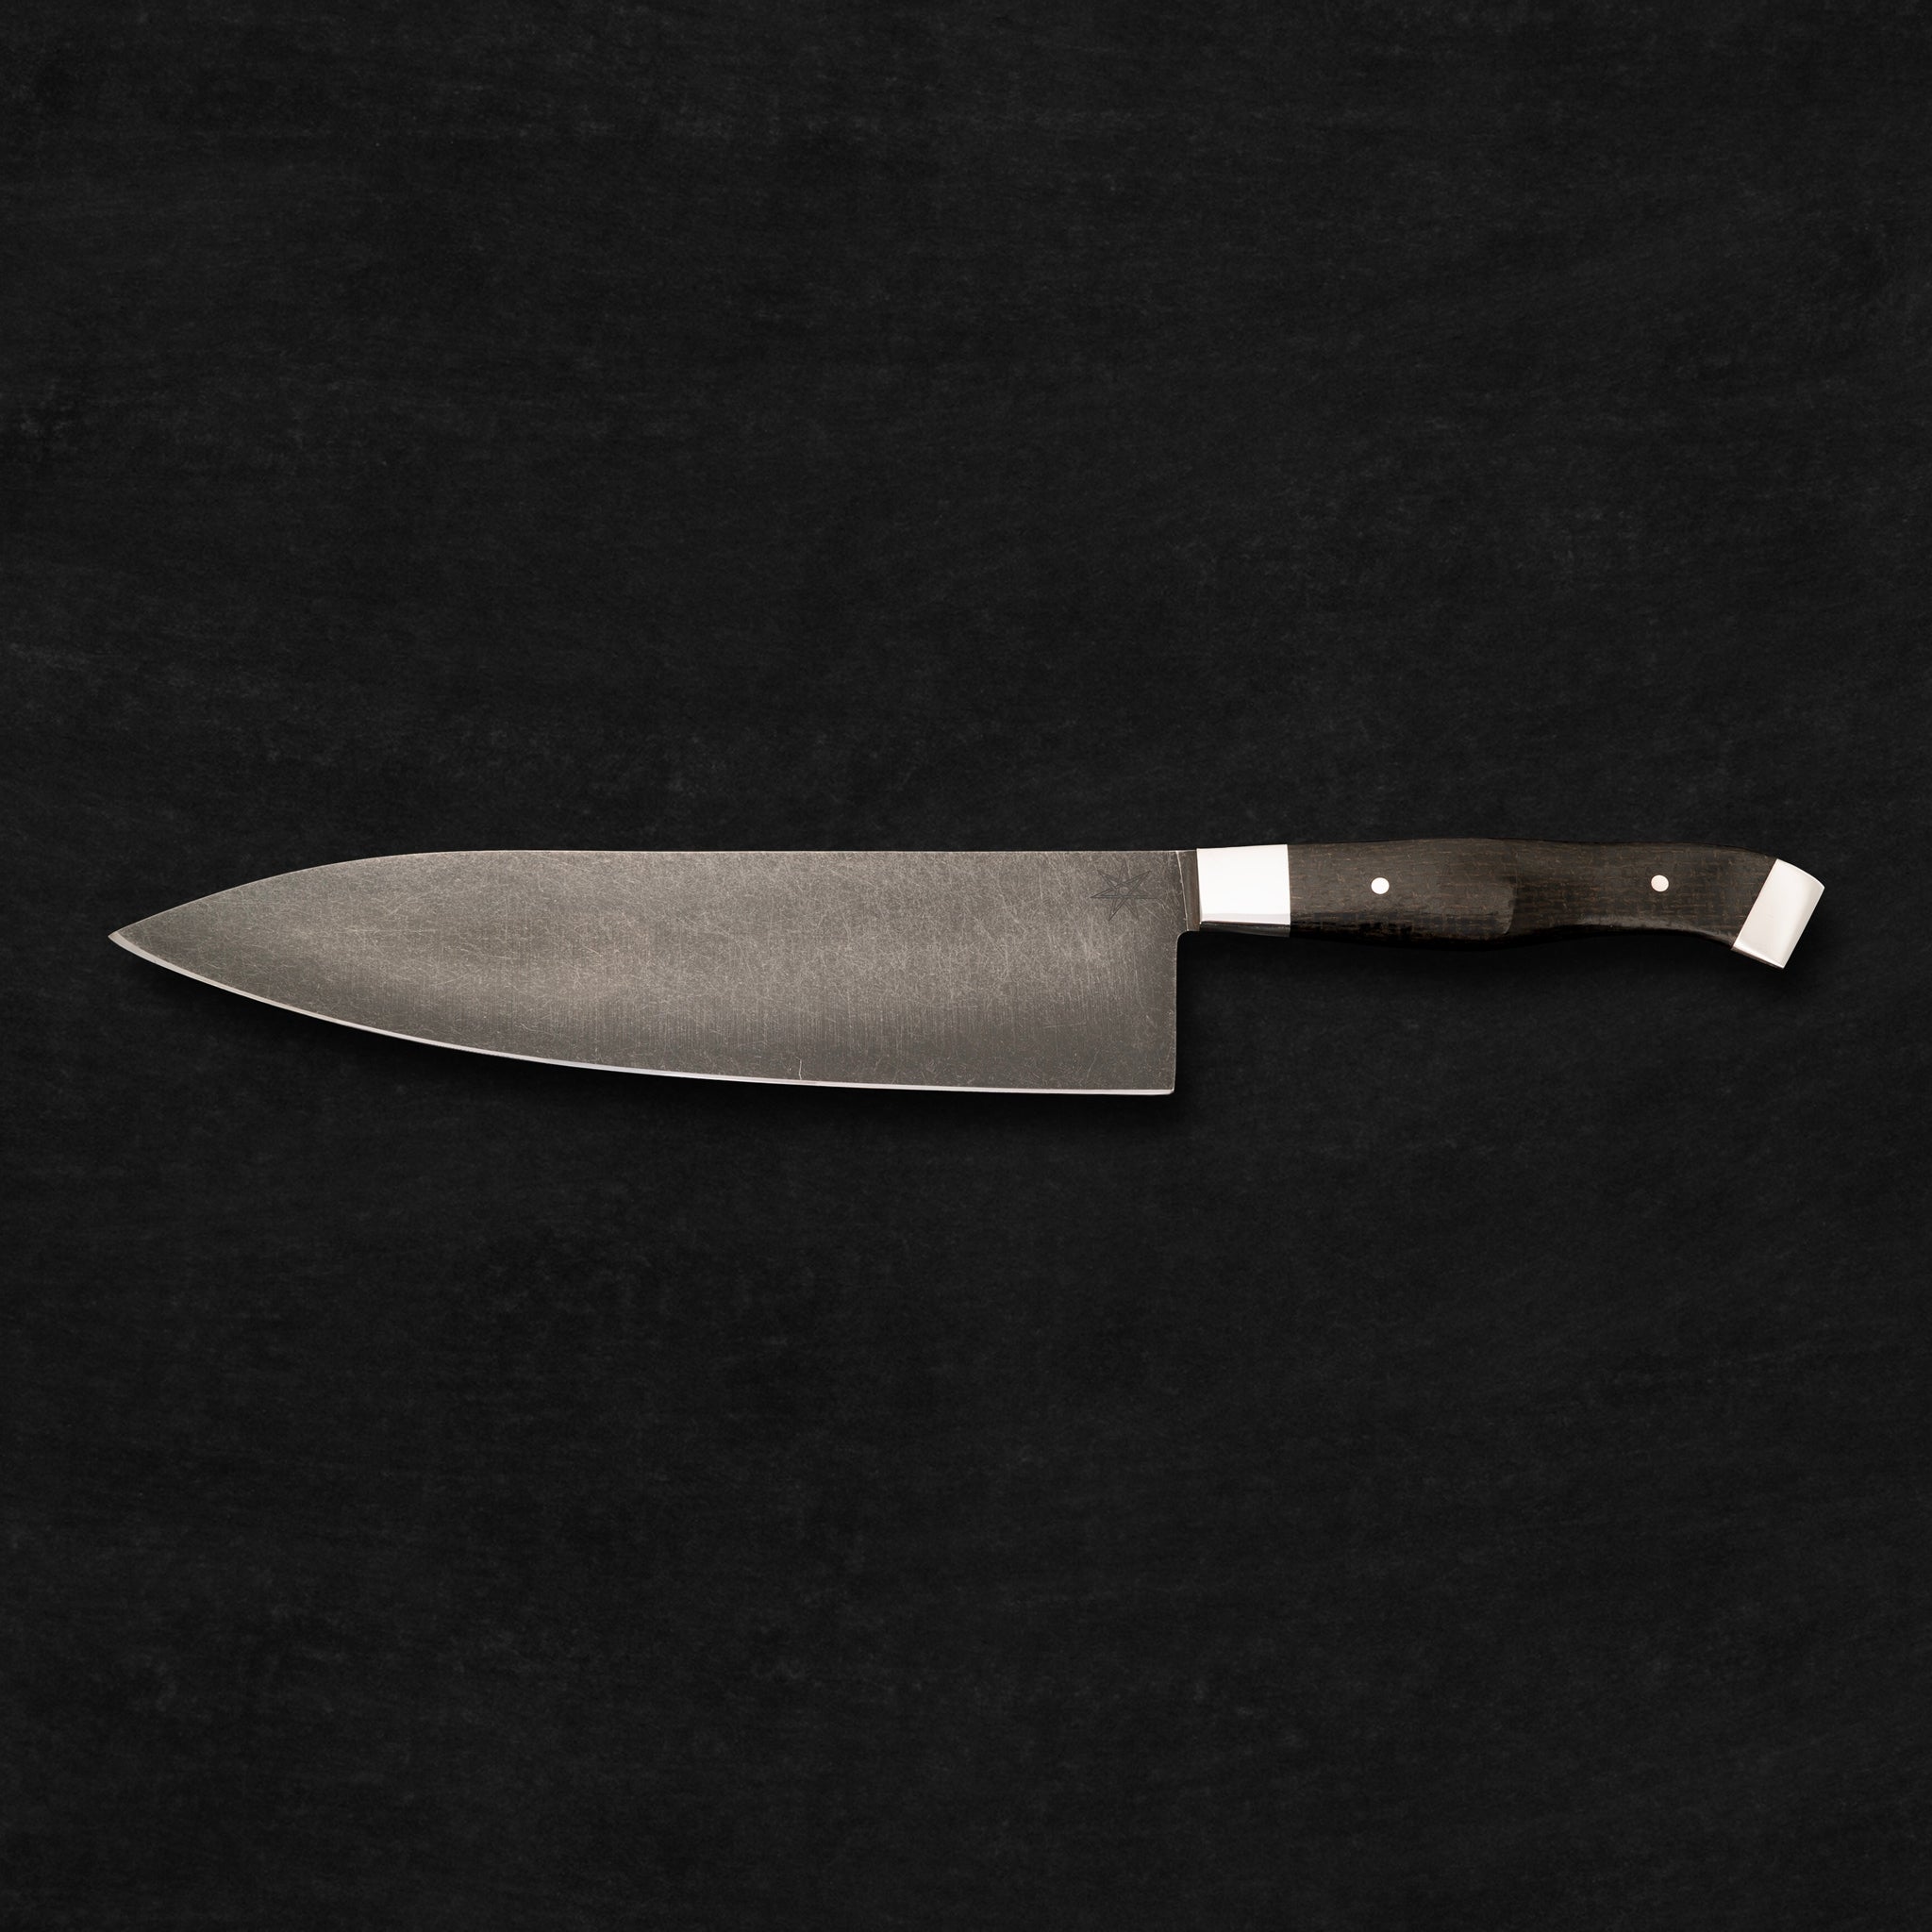 8.5" Carbon Steel Chef Knife with Stonewash Finished Blade, Black Burlap Micarta Handle, Stainless Steel Bolster and Pommel by Town Cutler